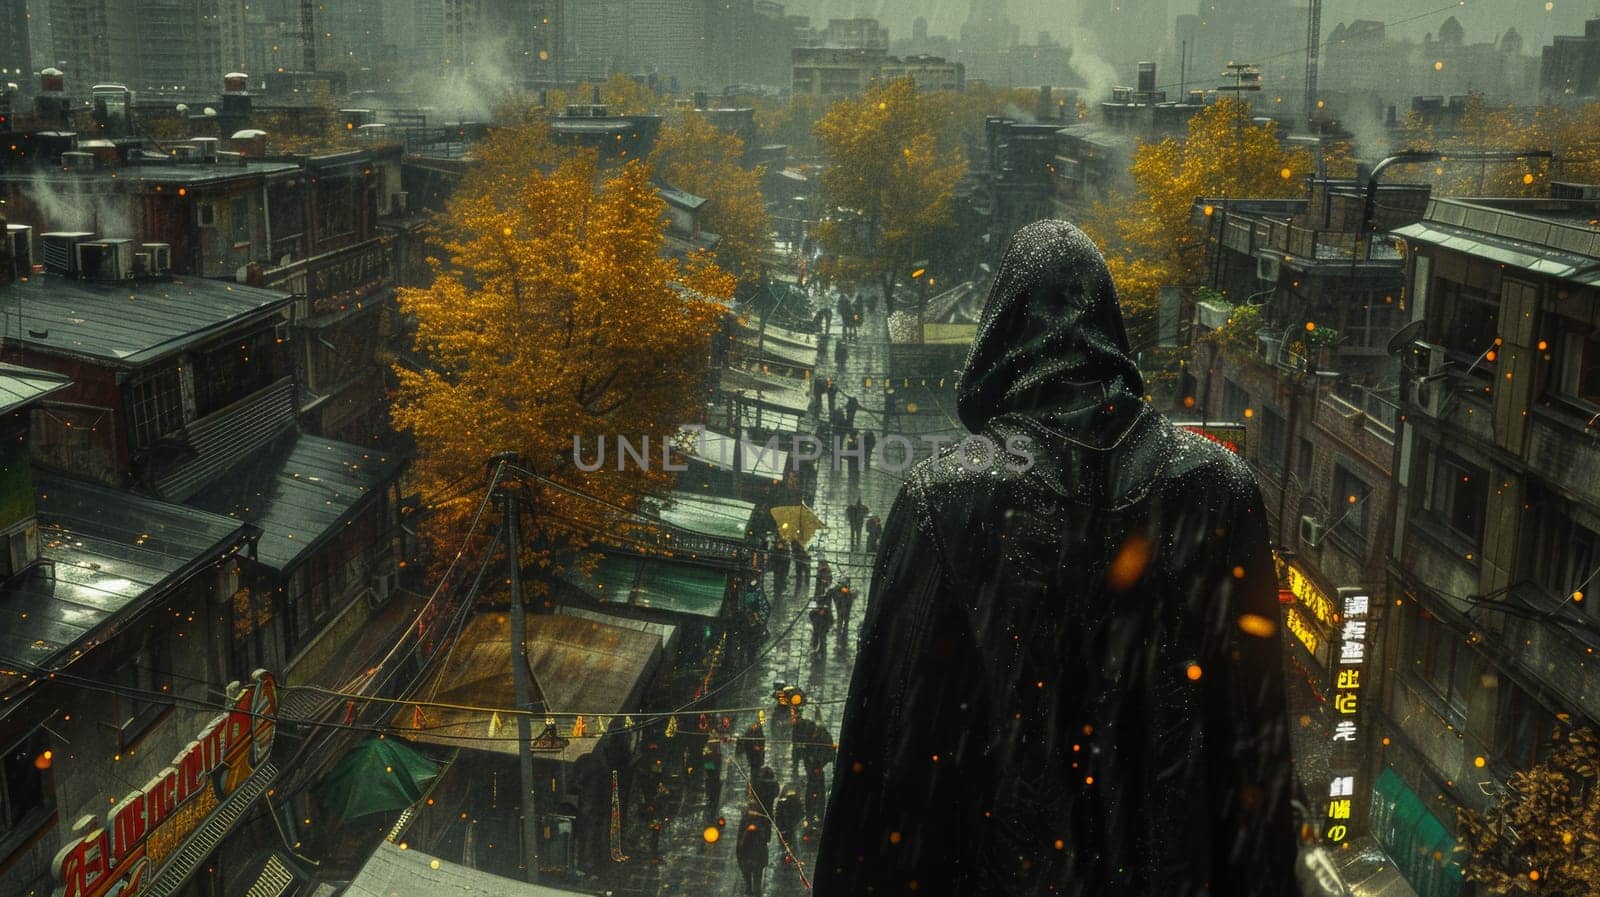 A person in a hooded cloak standing on top of an overpass